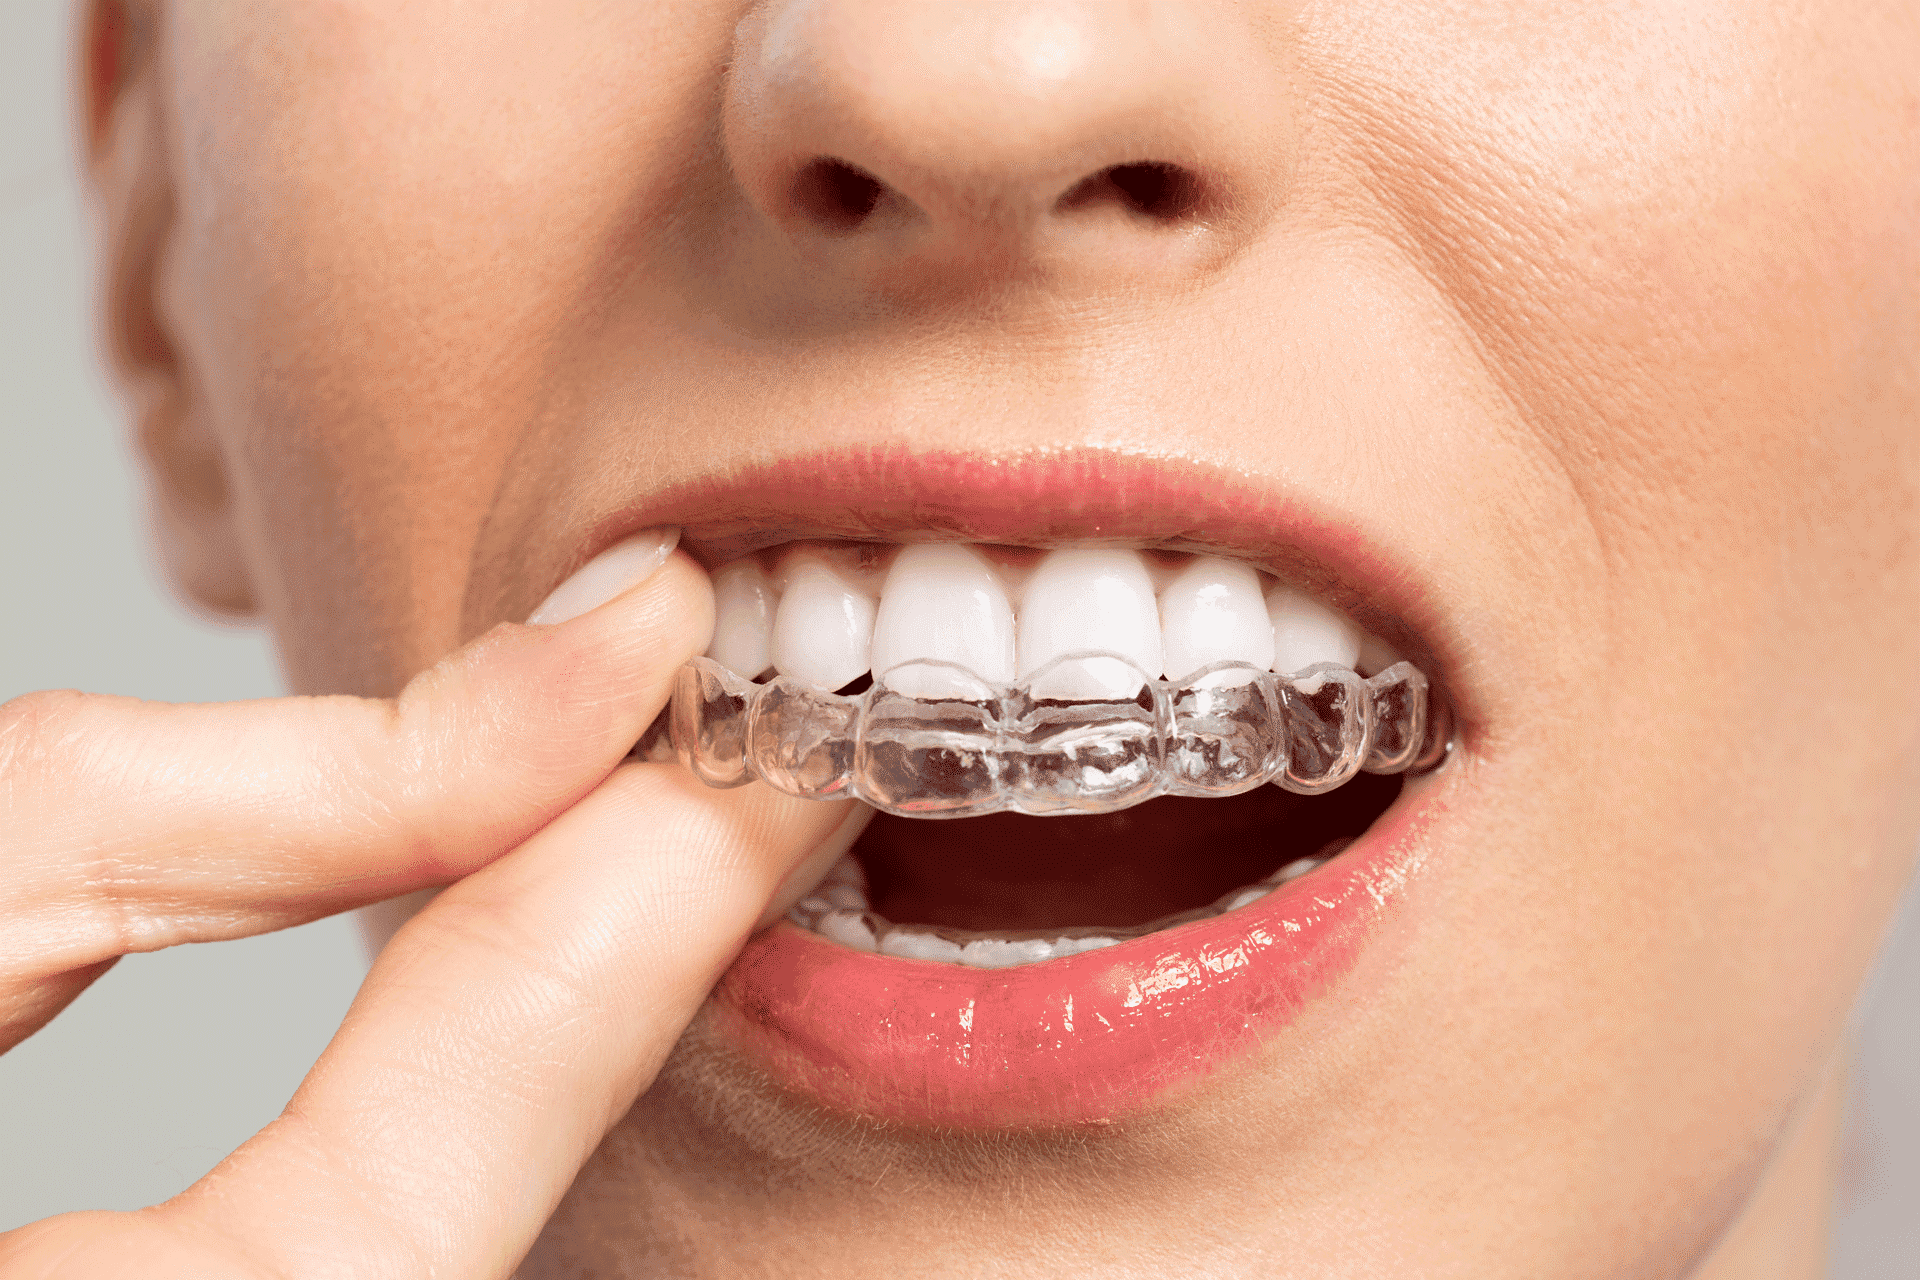 What are Invisalign Attachments? Why Are They Needed? - Dental Health  Society